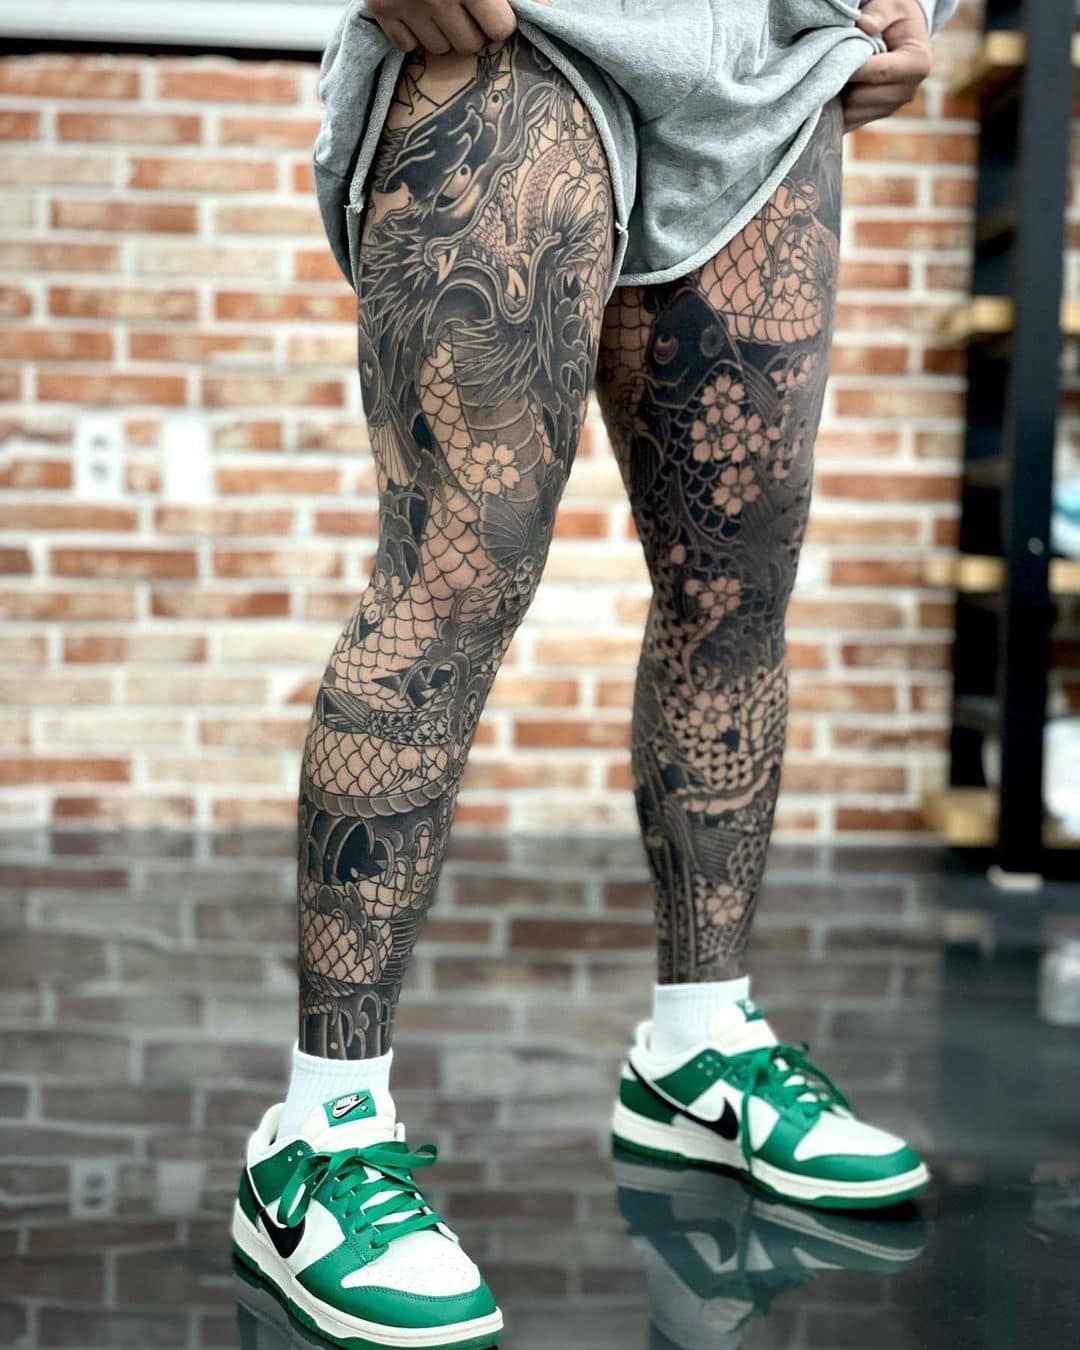 A fusion of Eastern culture in this striking leg sleeve inked and designed  for Ryan by senior resident artist David. Barong, Rangda and ... | Instagram